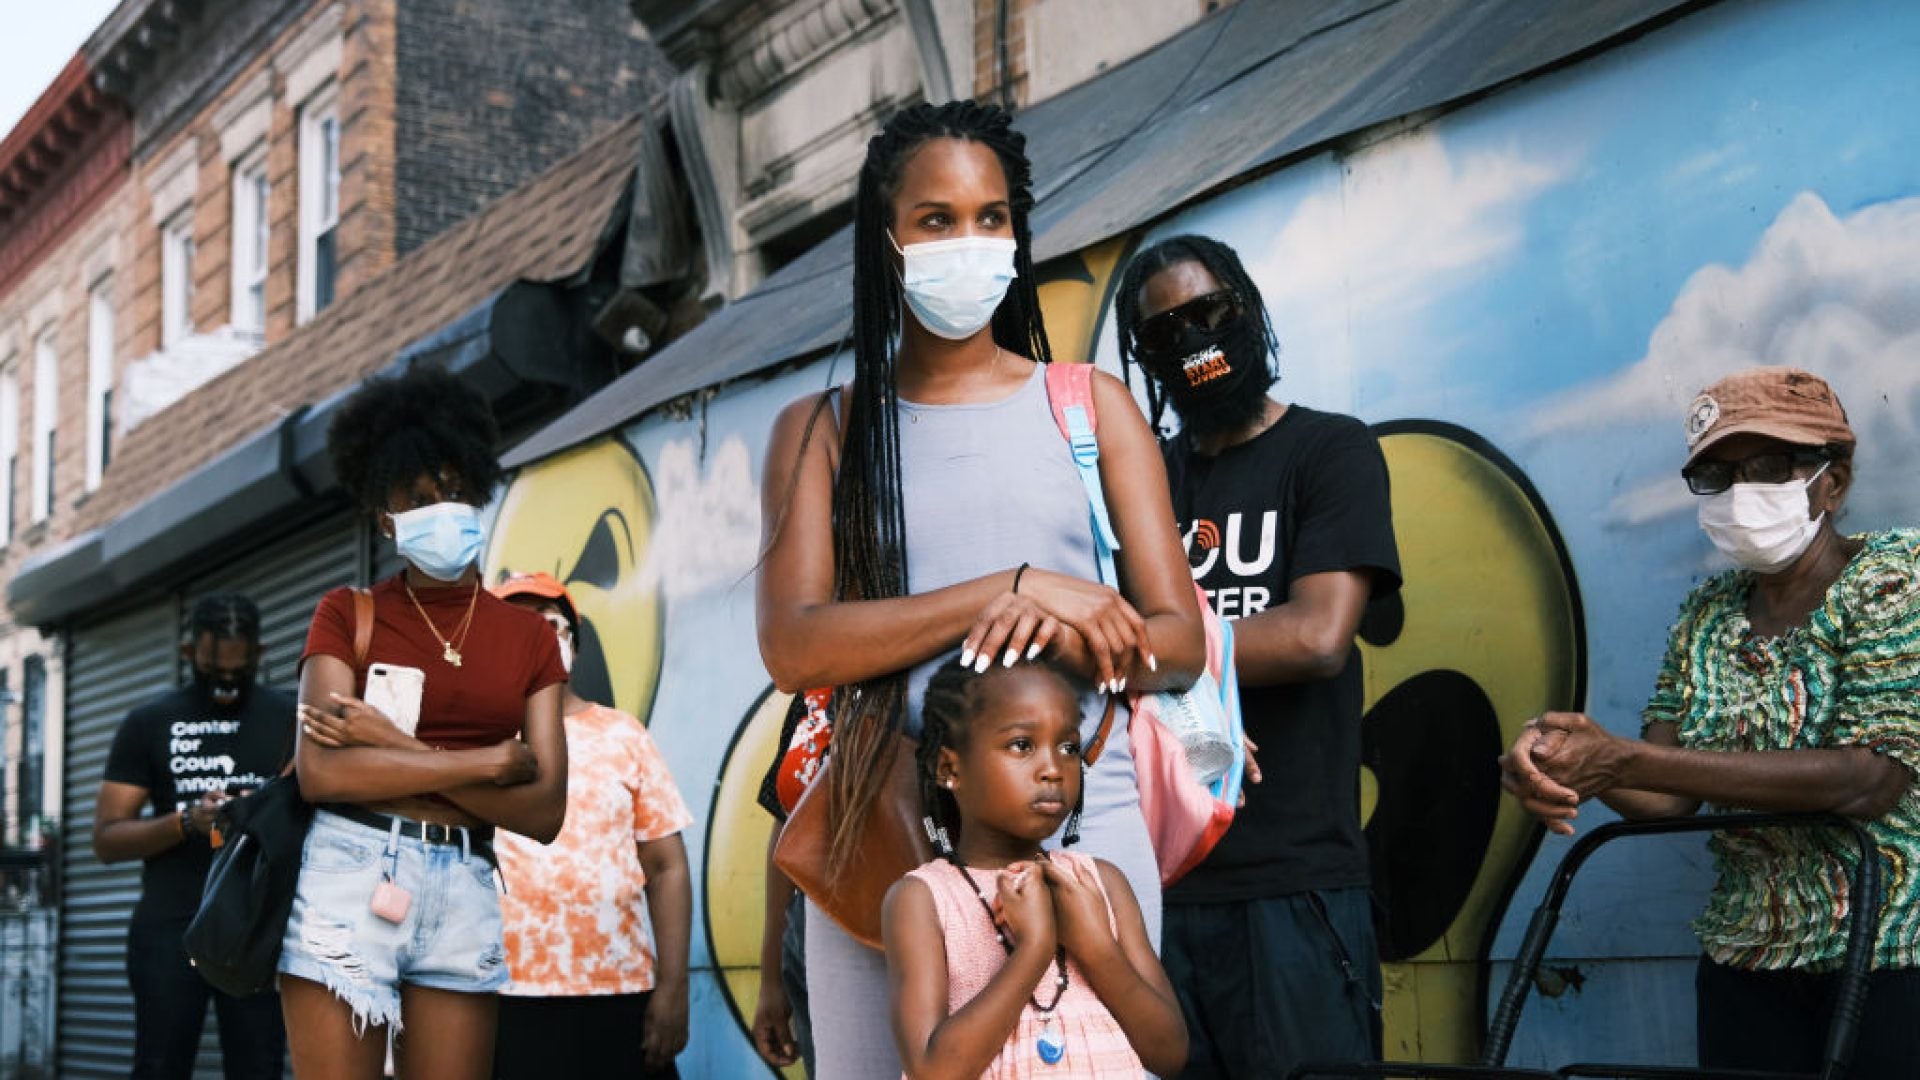 This Black Working Class Community Policed Itself For 5 Days. Here's How It Turned Out